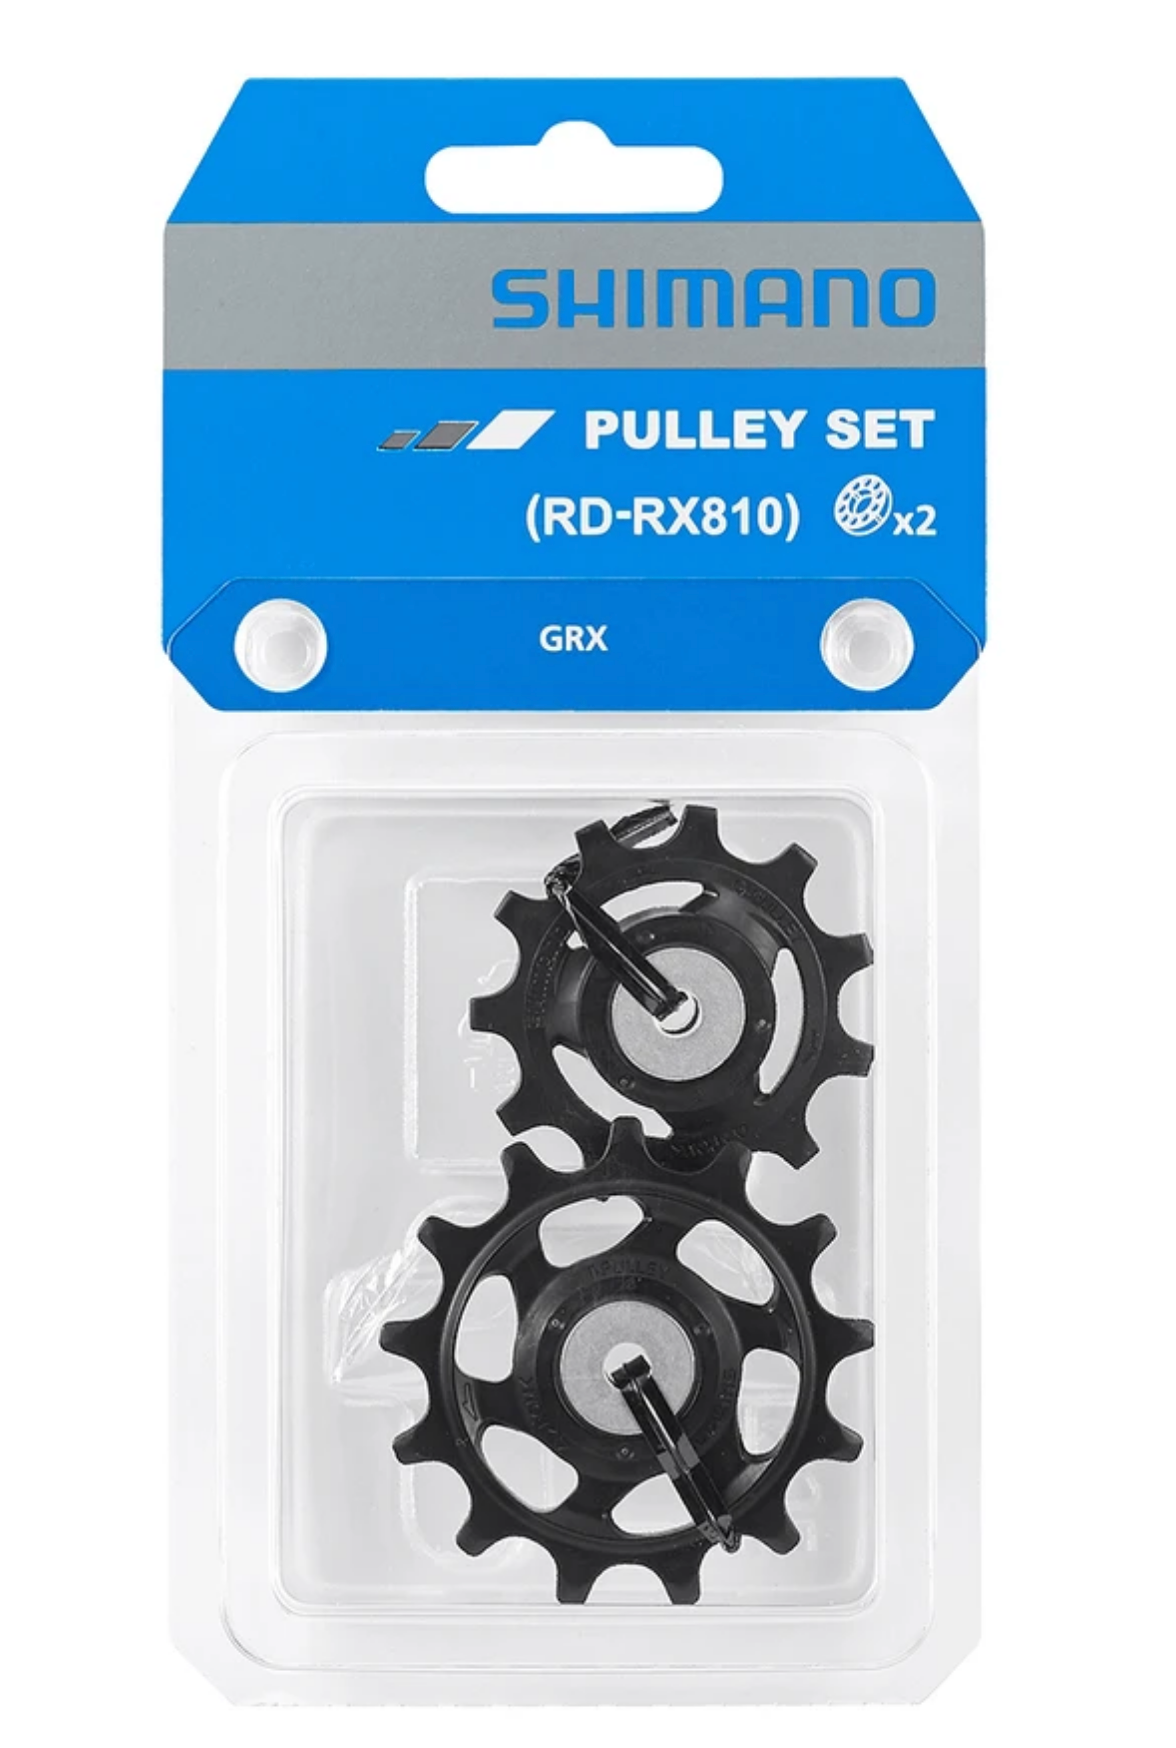 Pulley Set RD-RX 810 GRX – Brown's Sports & Cycle Co. Ltd.